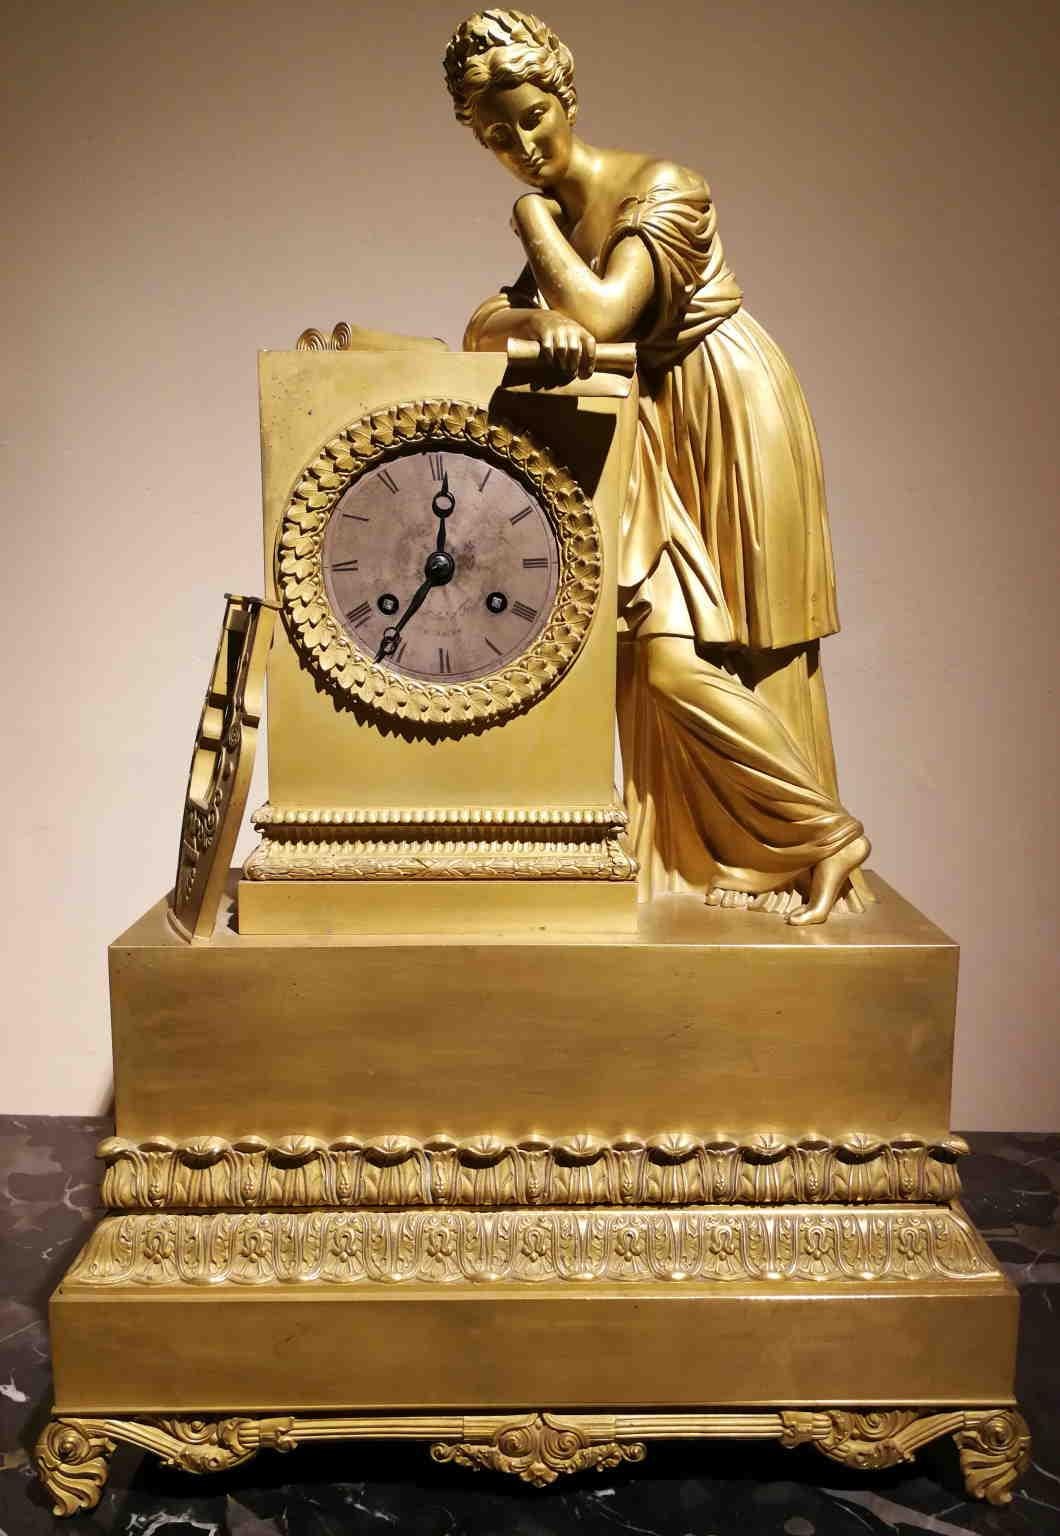 Swiss French Imperial Neoclassic Mantel Clock 19th century - Other Art Style Art by Honoré Pons